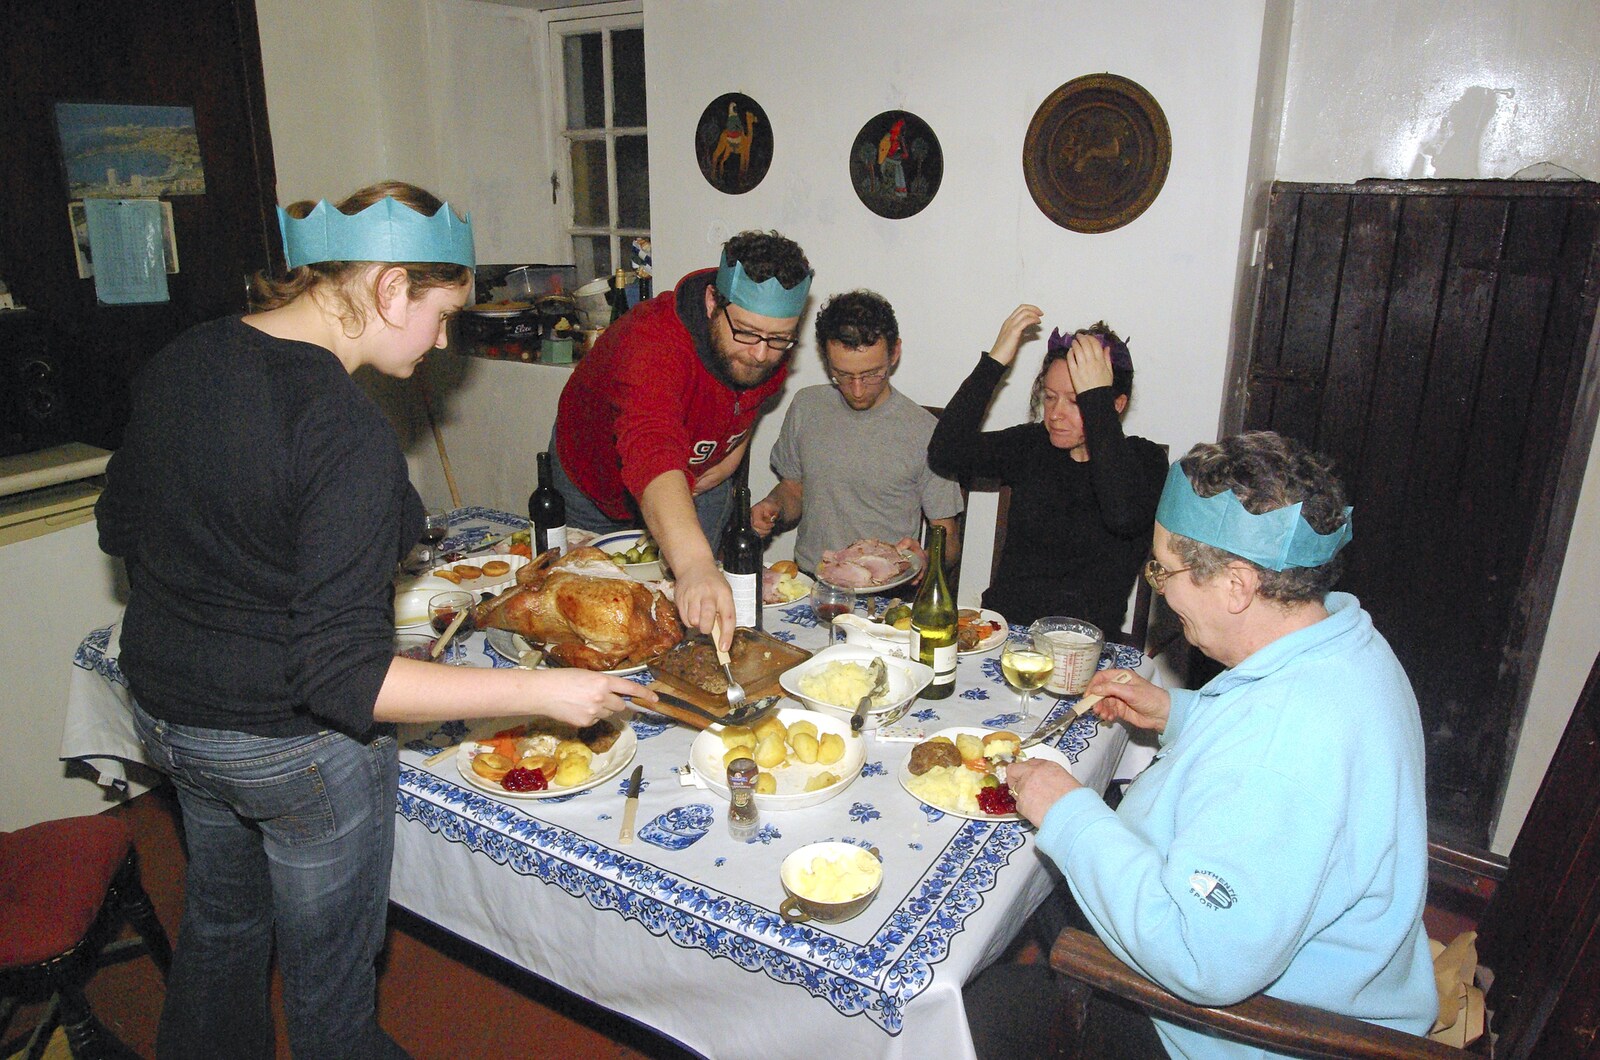 Noddy lunges for a roast potato from The BBs at the Park Hotel, and Christmas in Blackrock, Dublin, Ireland - 25th December 2006